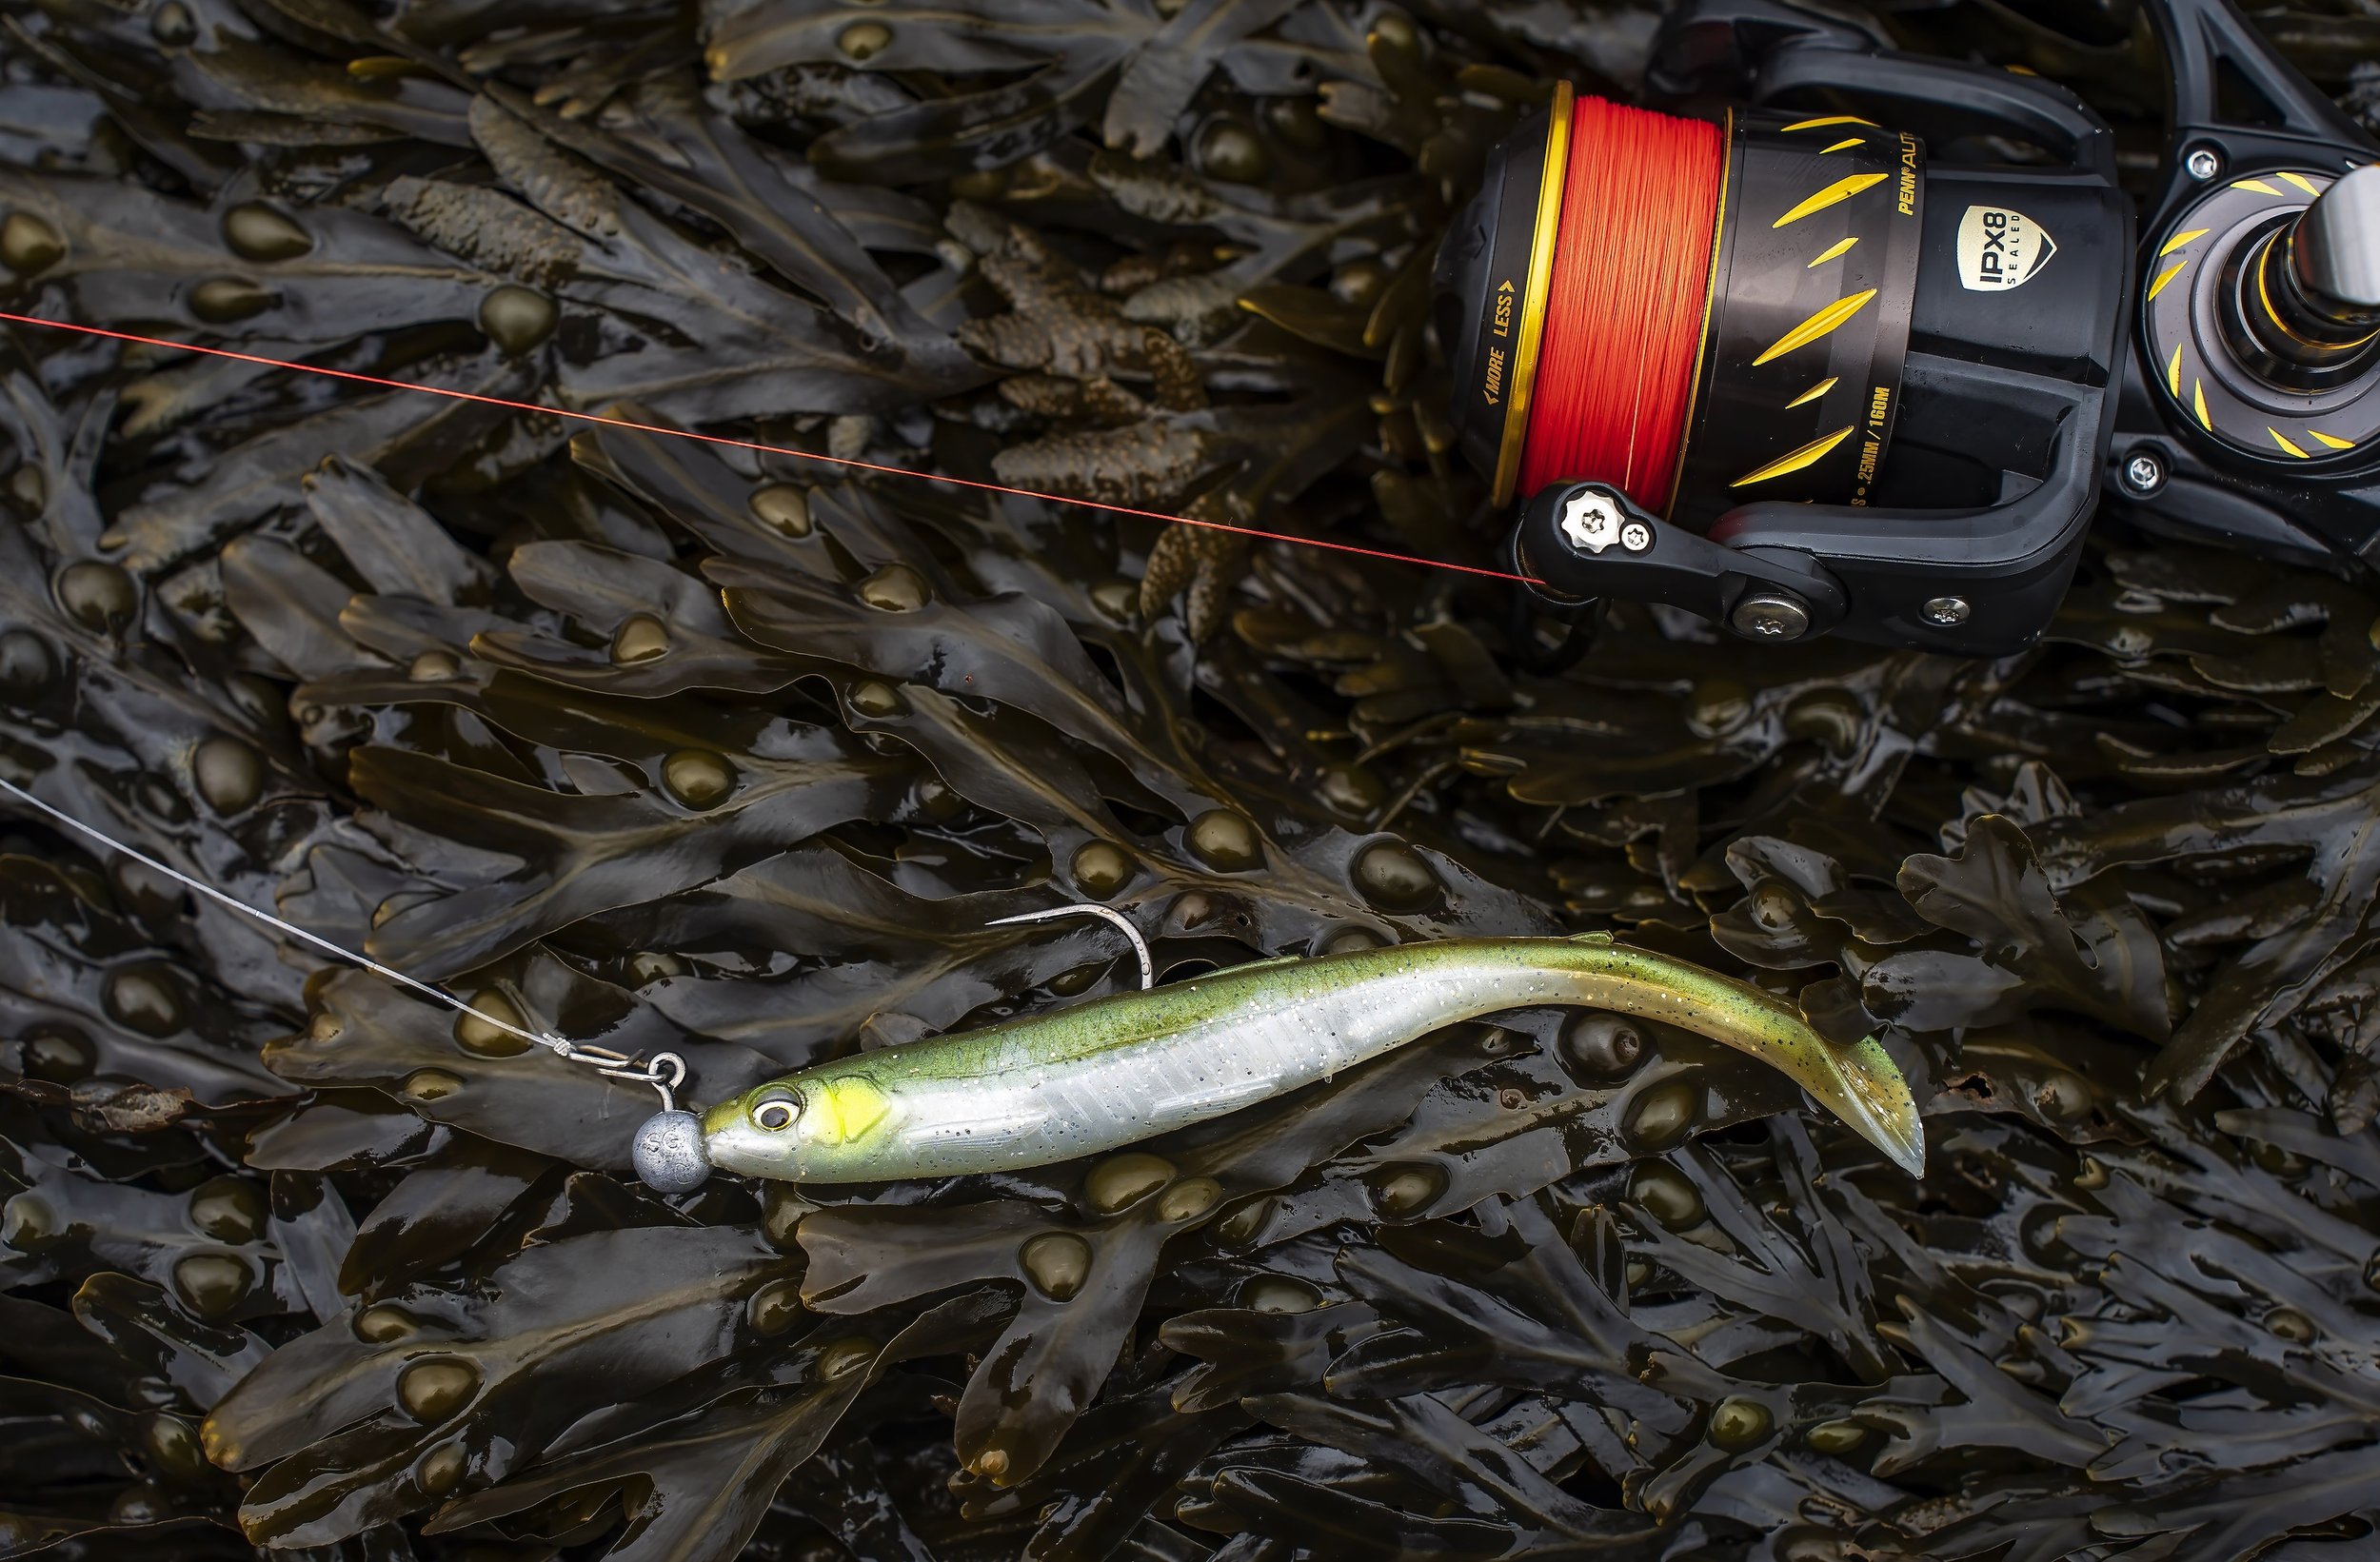 Wow these lures look good in the water when rigged like this